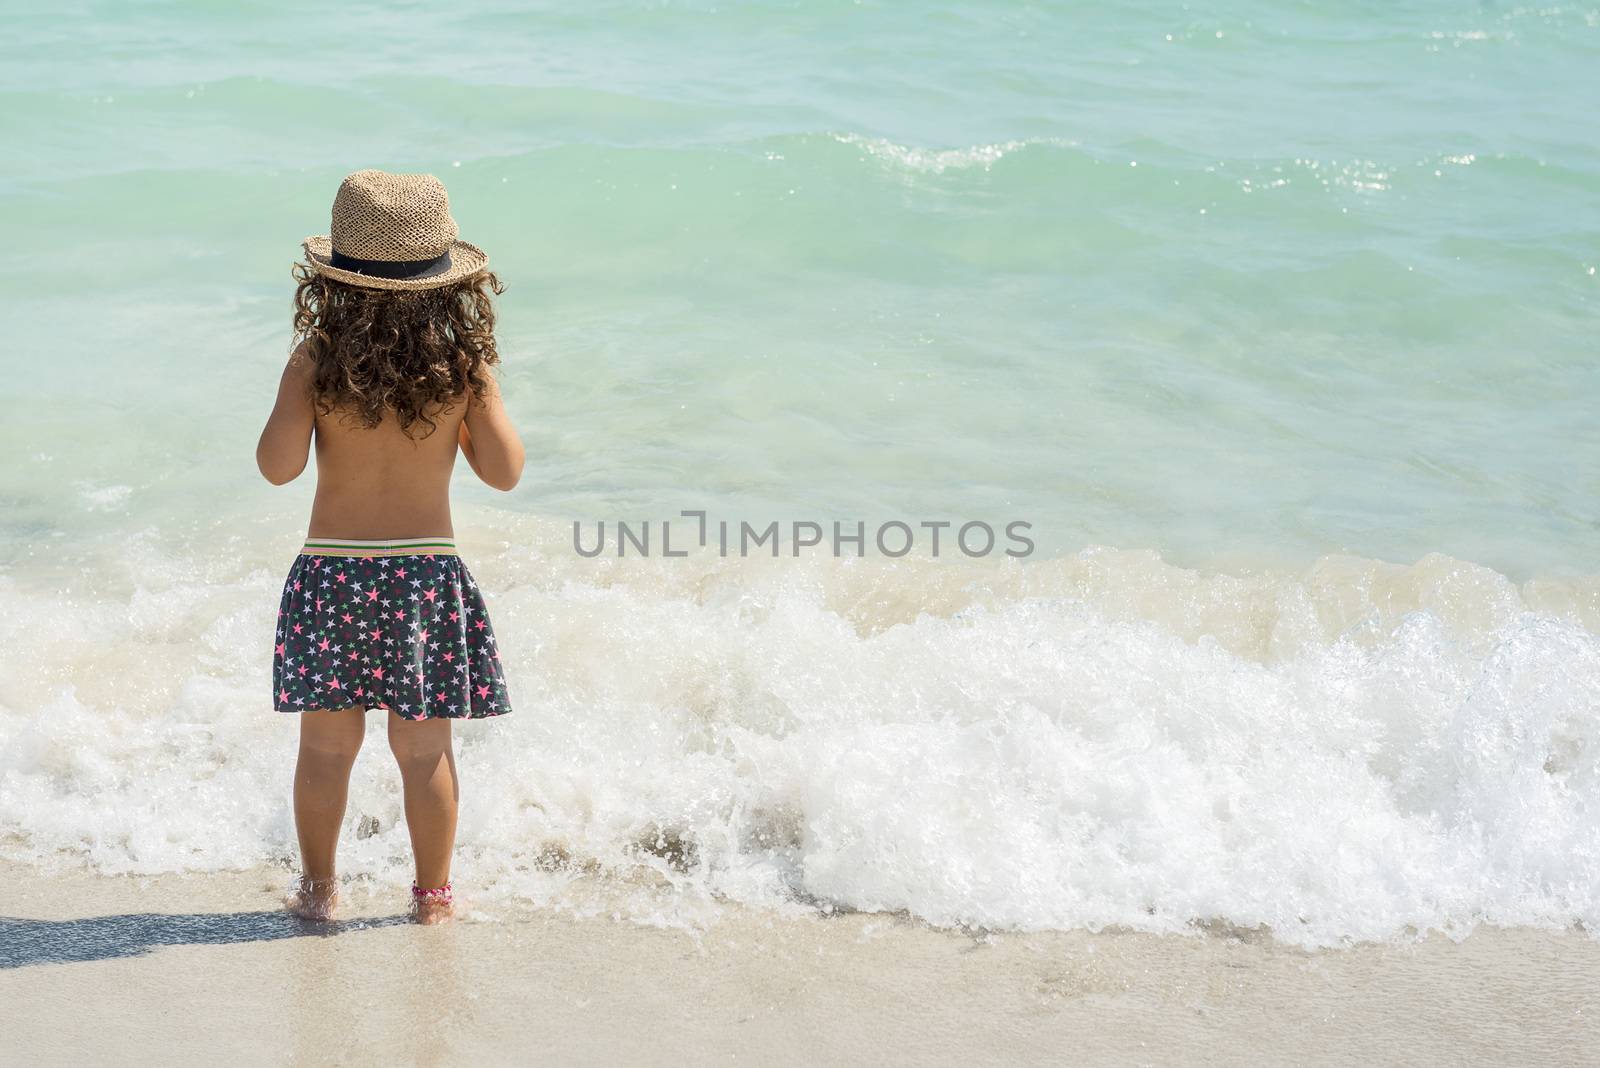 little girl with her back on the shore of a paradisiacal beach of white sand and turquoise waters, wearing a skirt and a cane hat